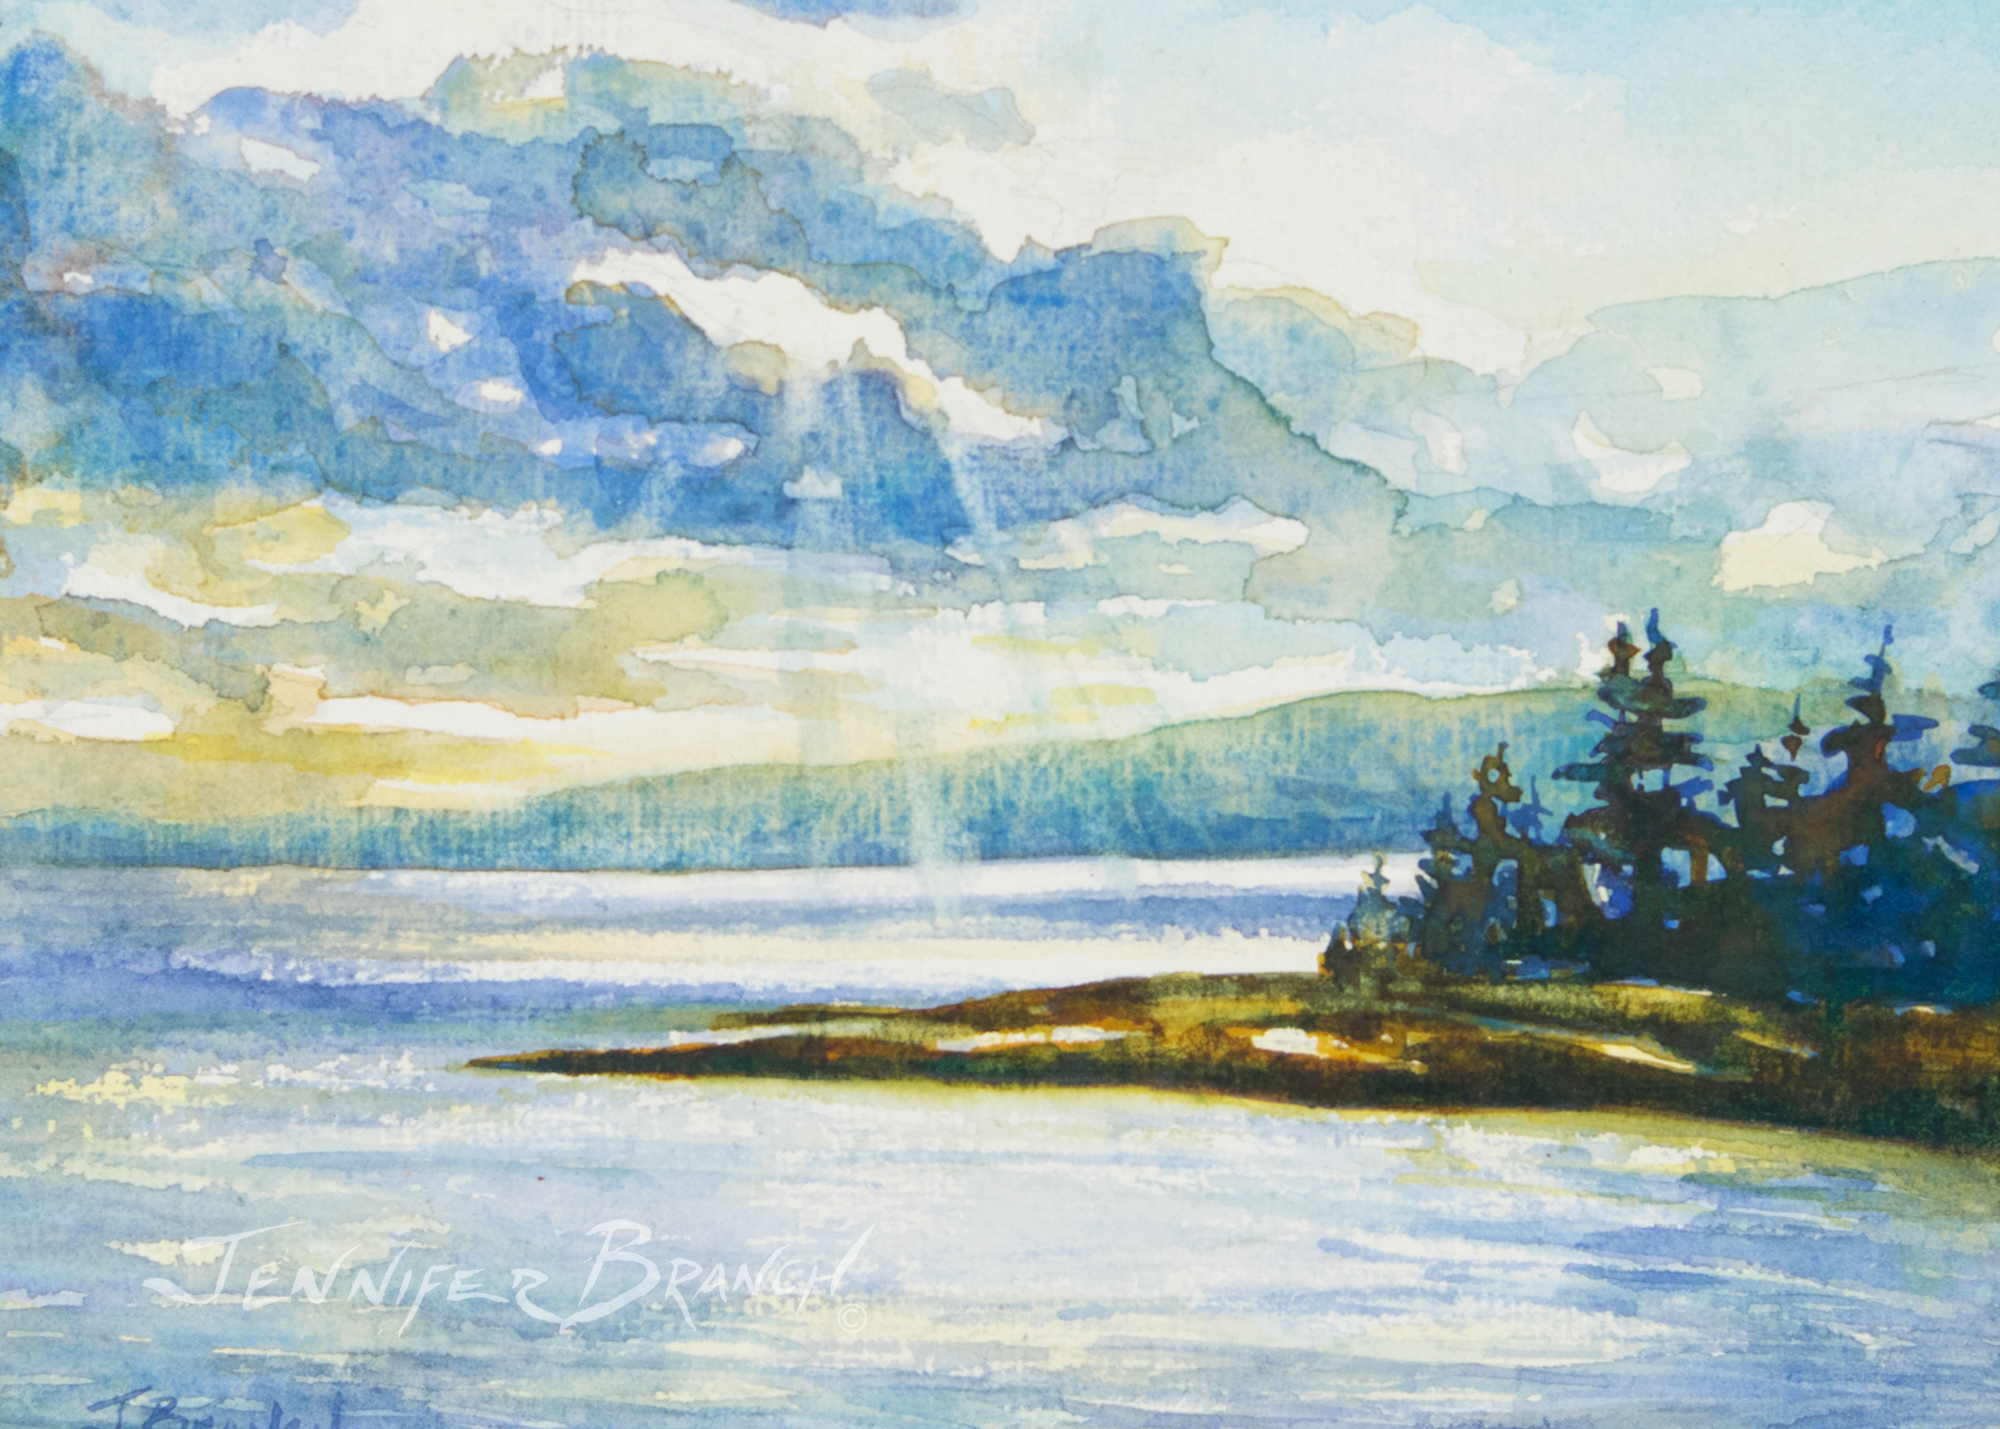 Schoodic, Maine watercolor painting by Jennifer Branch.